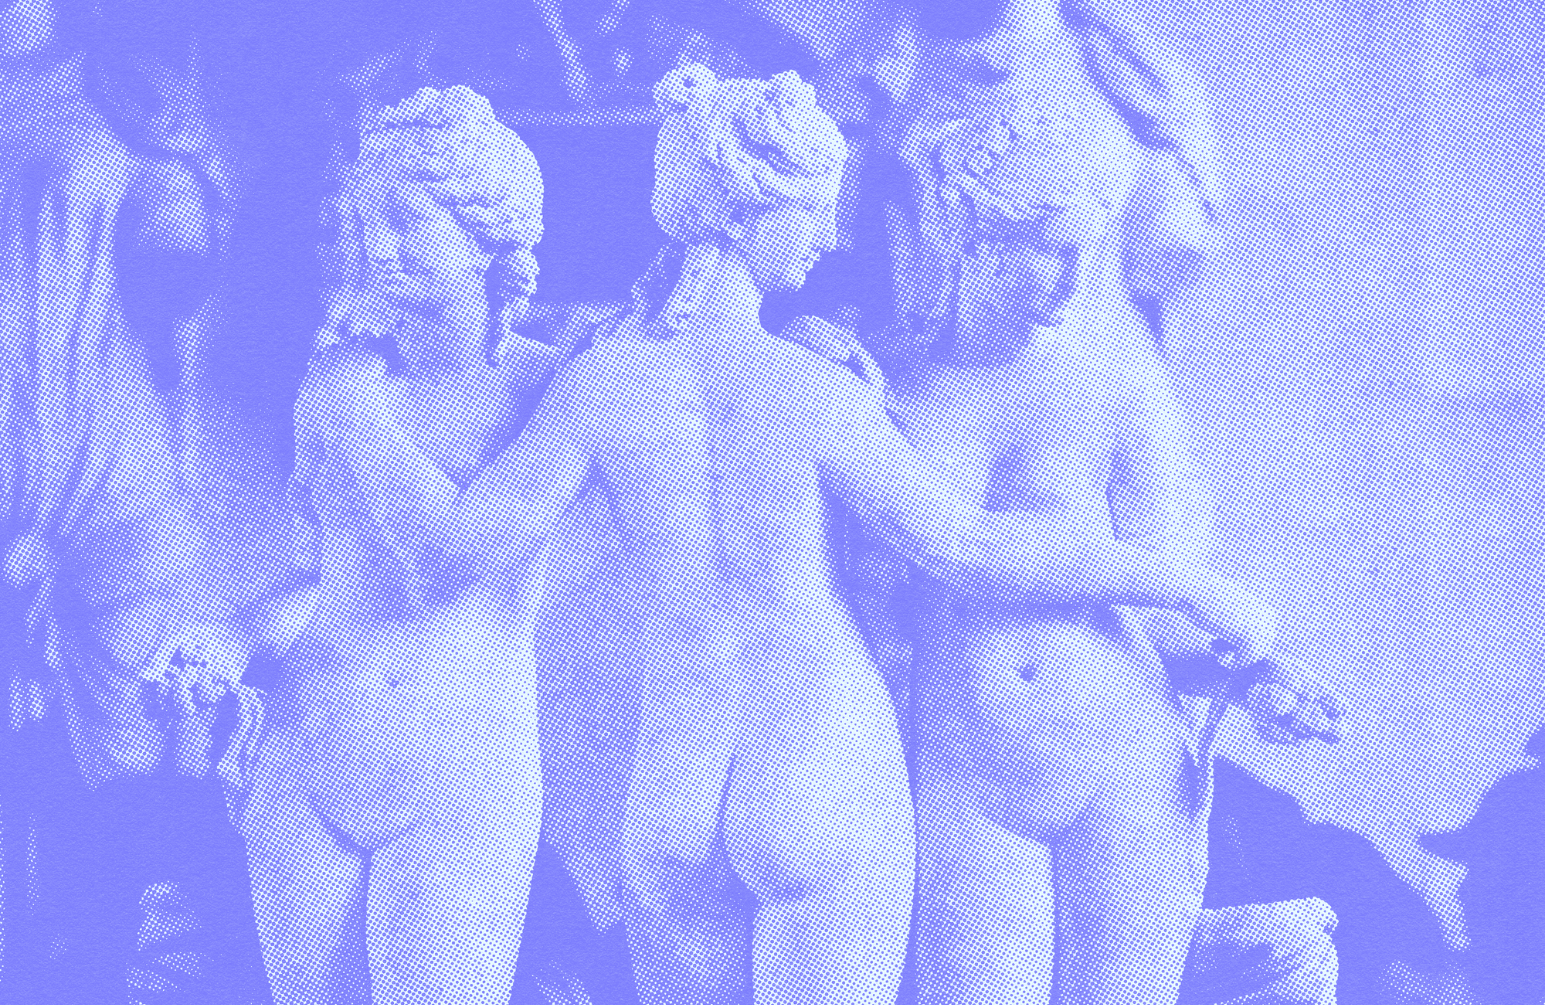 three nude nymph statues